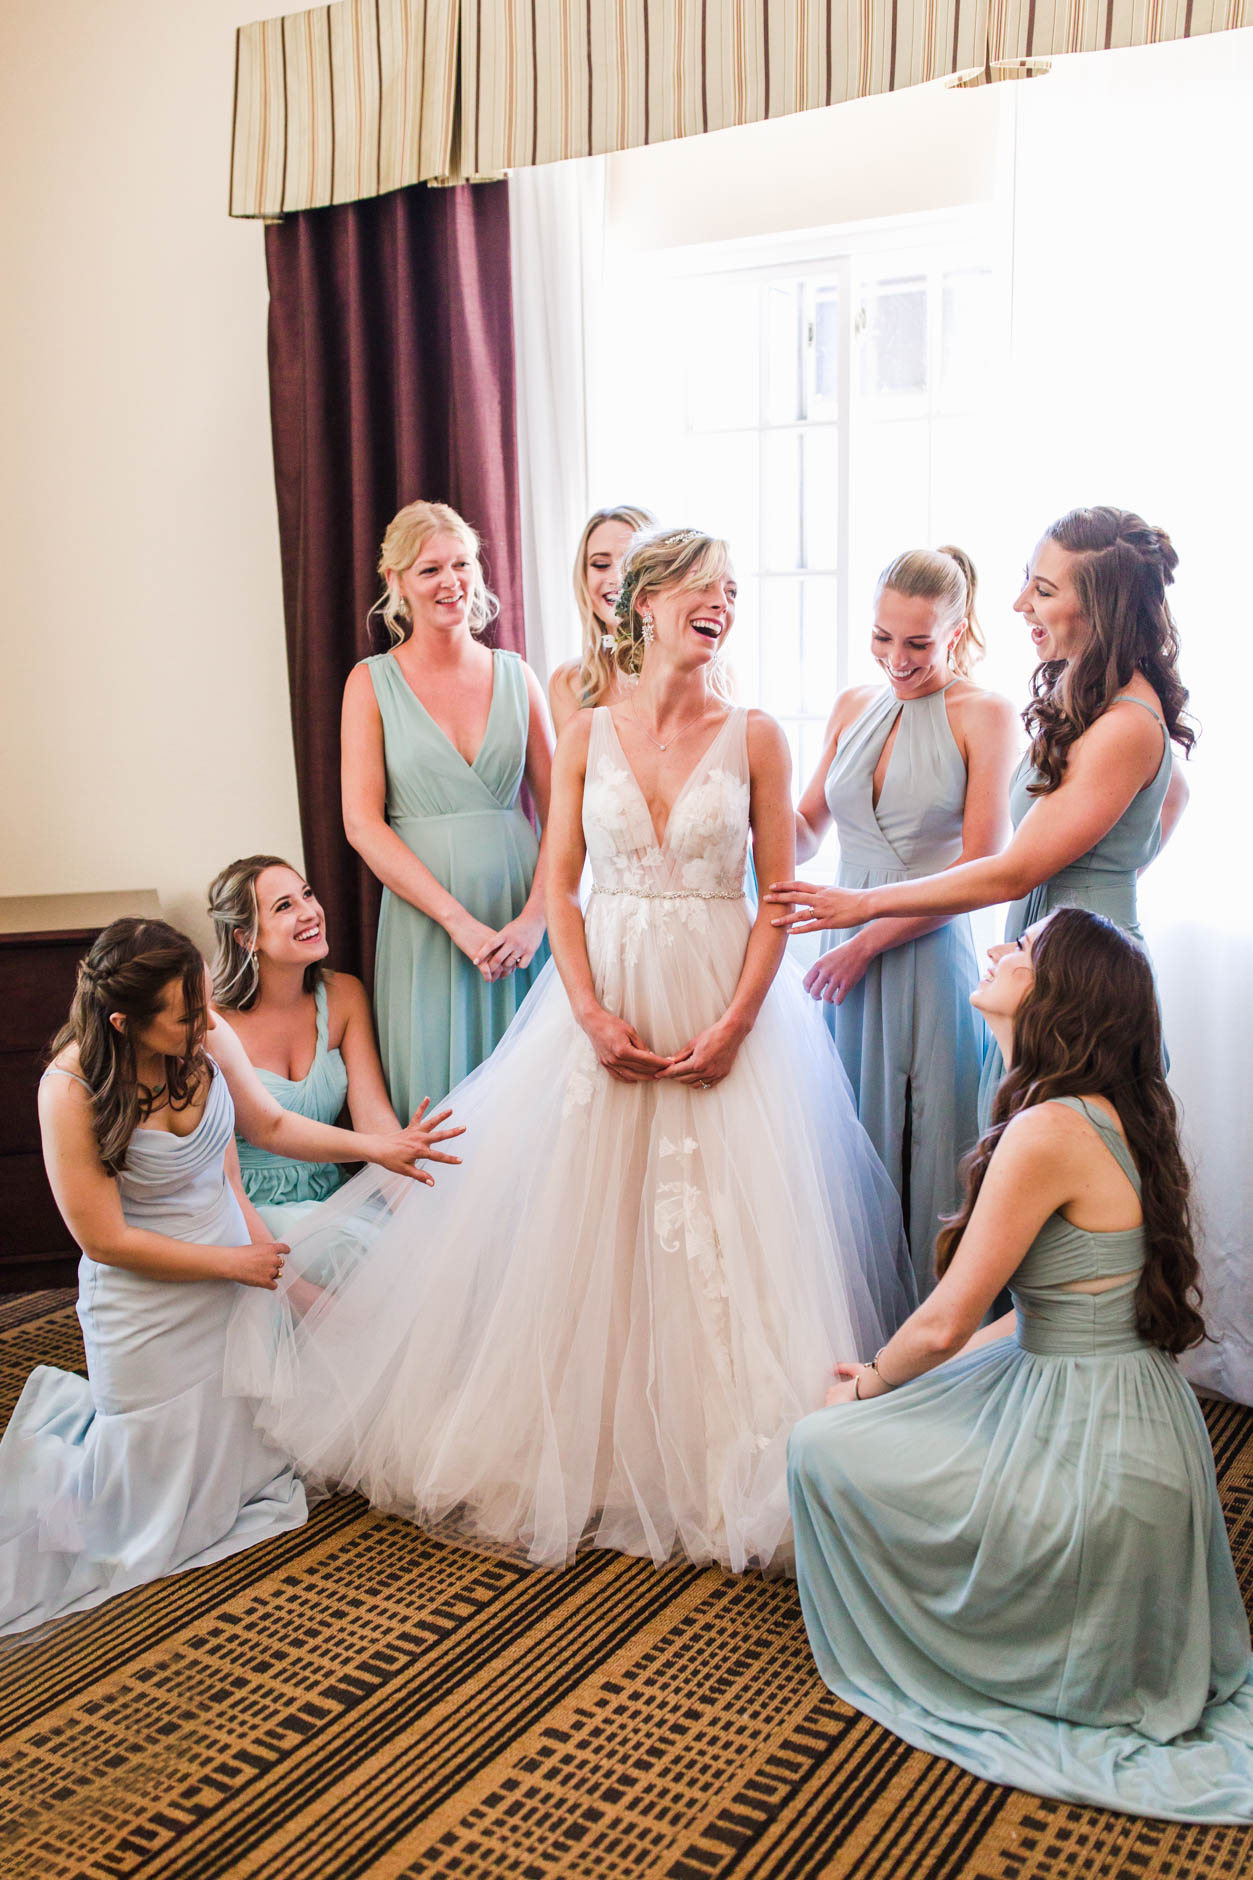 Bride laughing with her bridesmaids who are helping her get ready